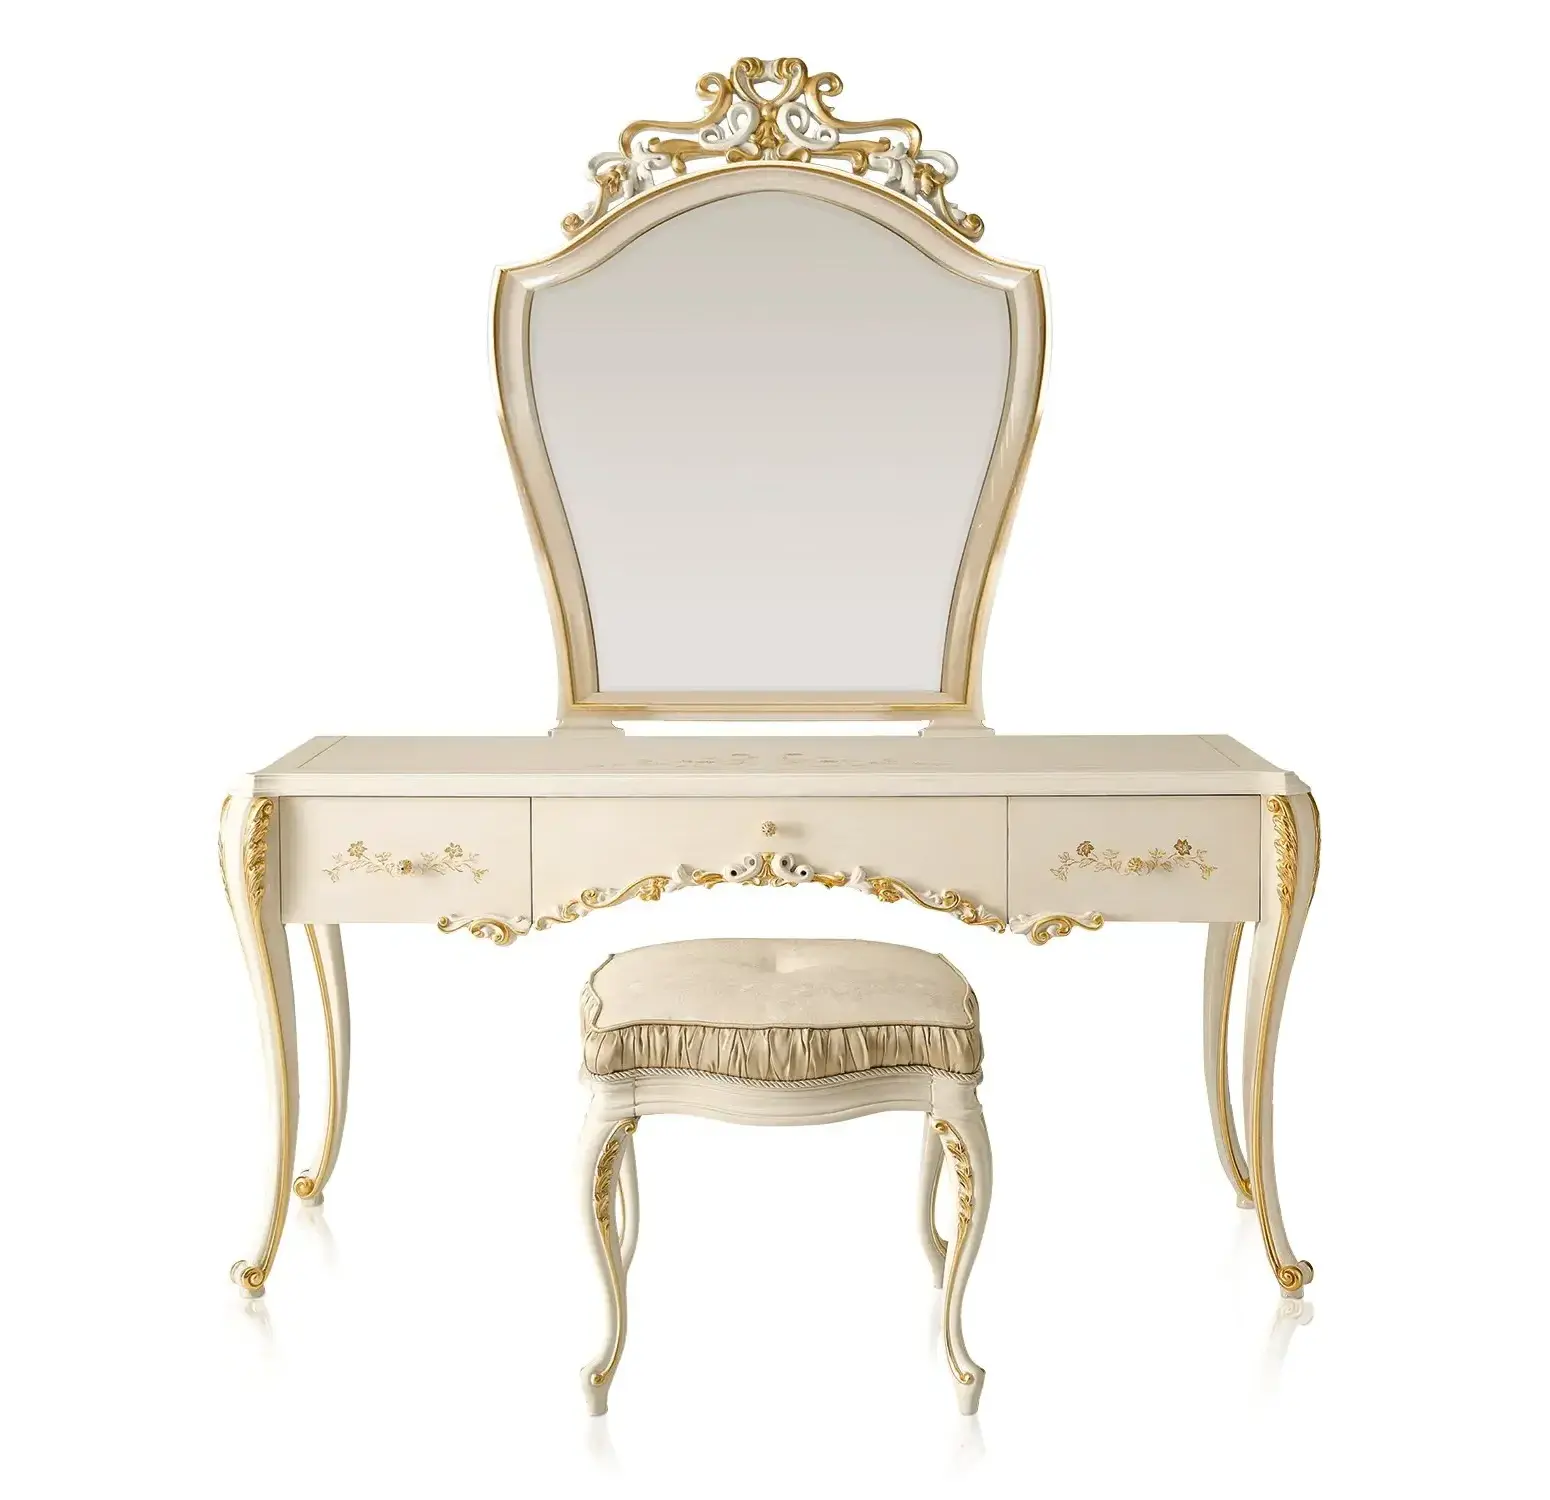 Artisan Crafted Dressing Table